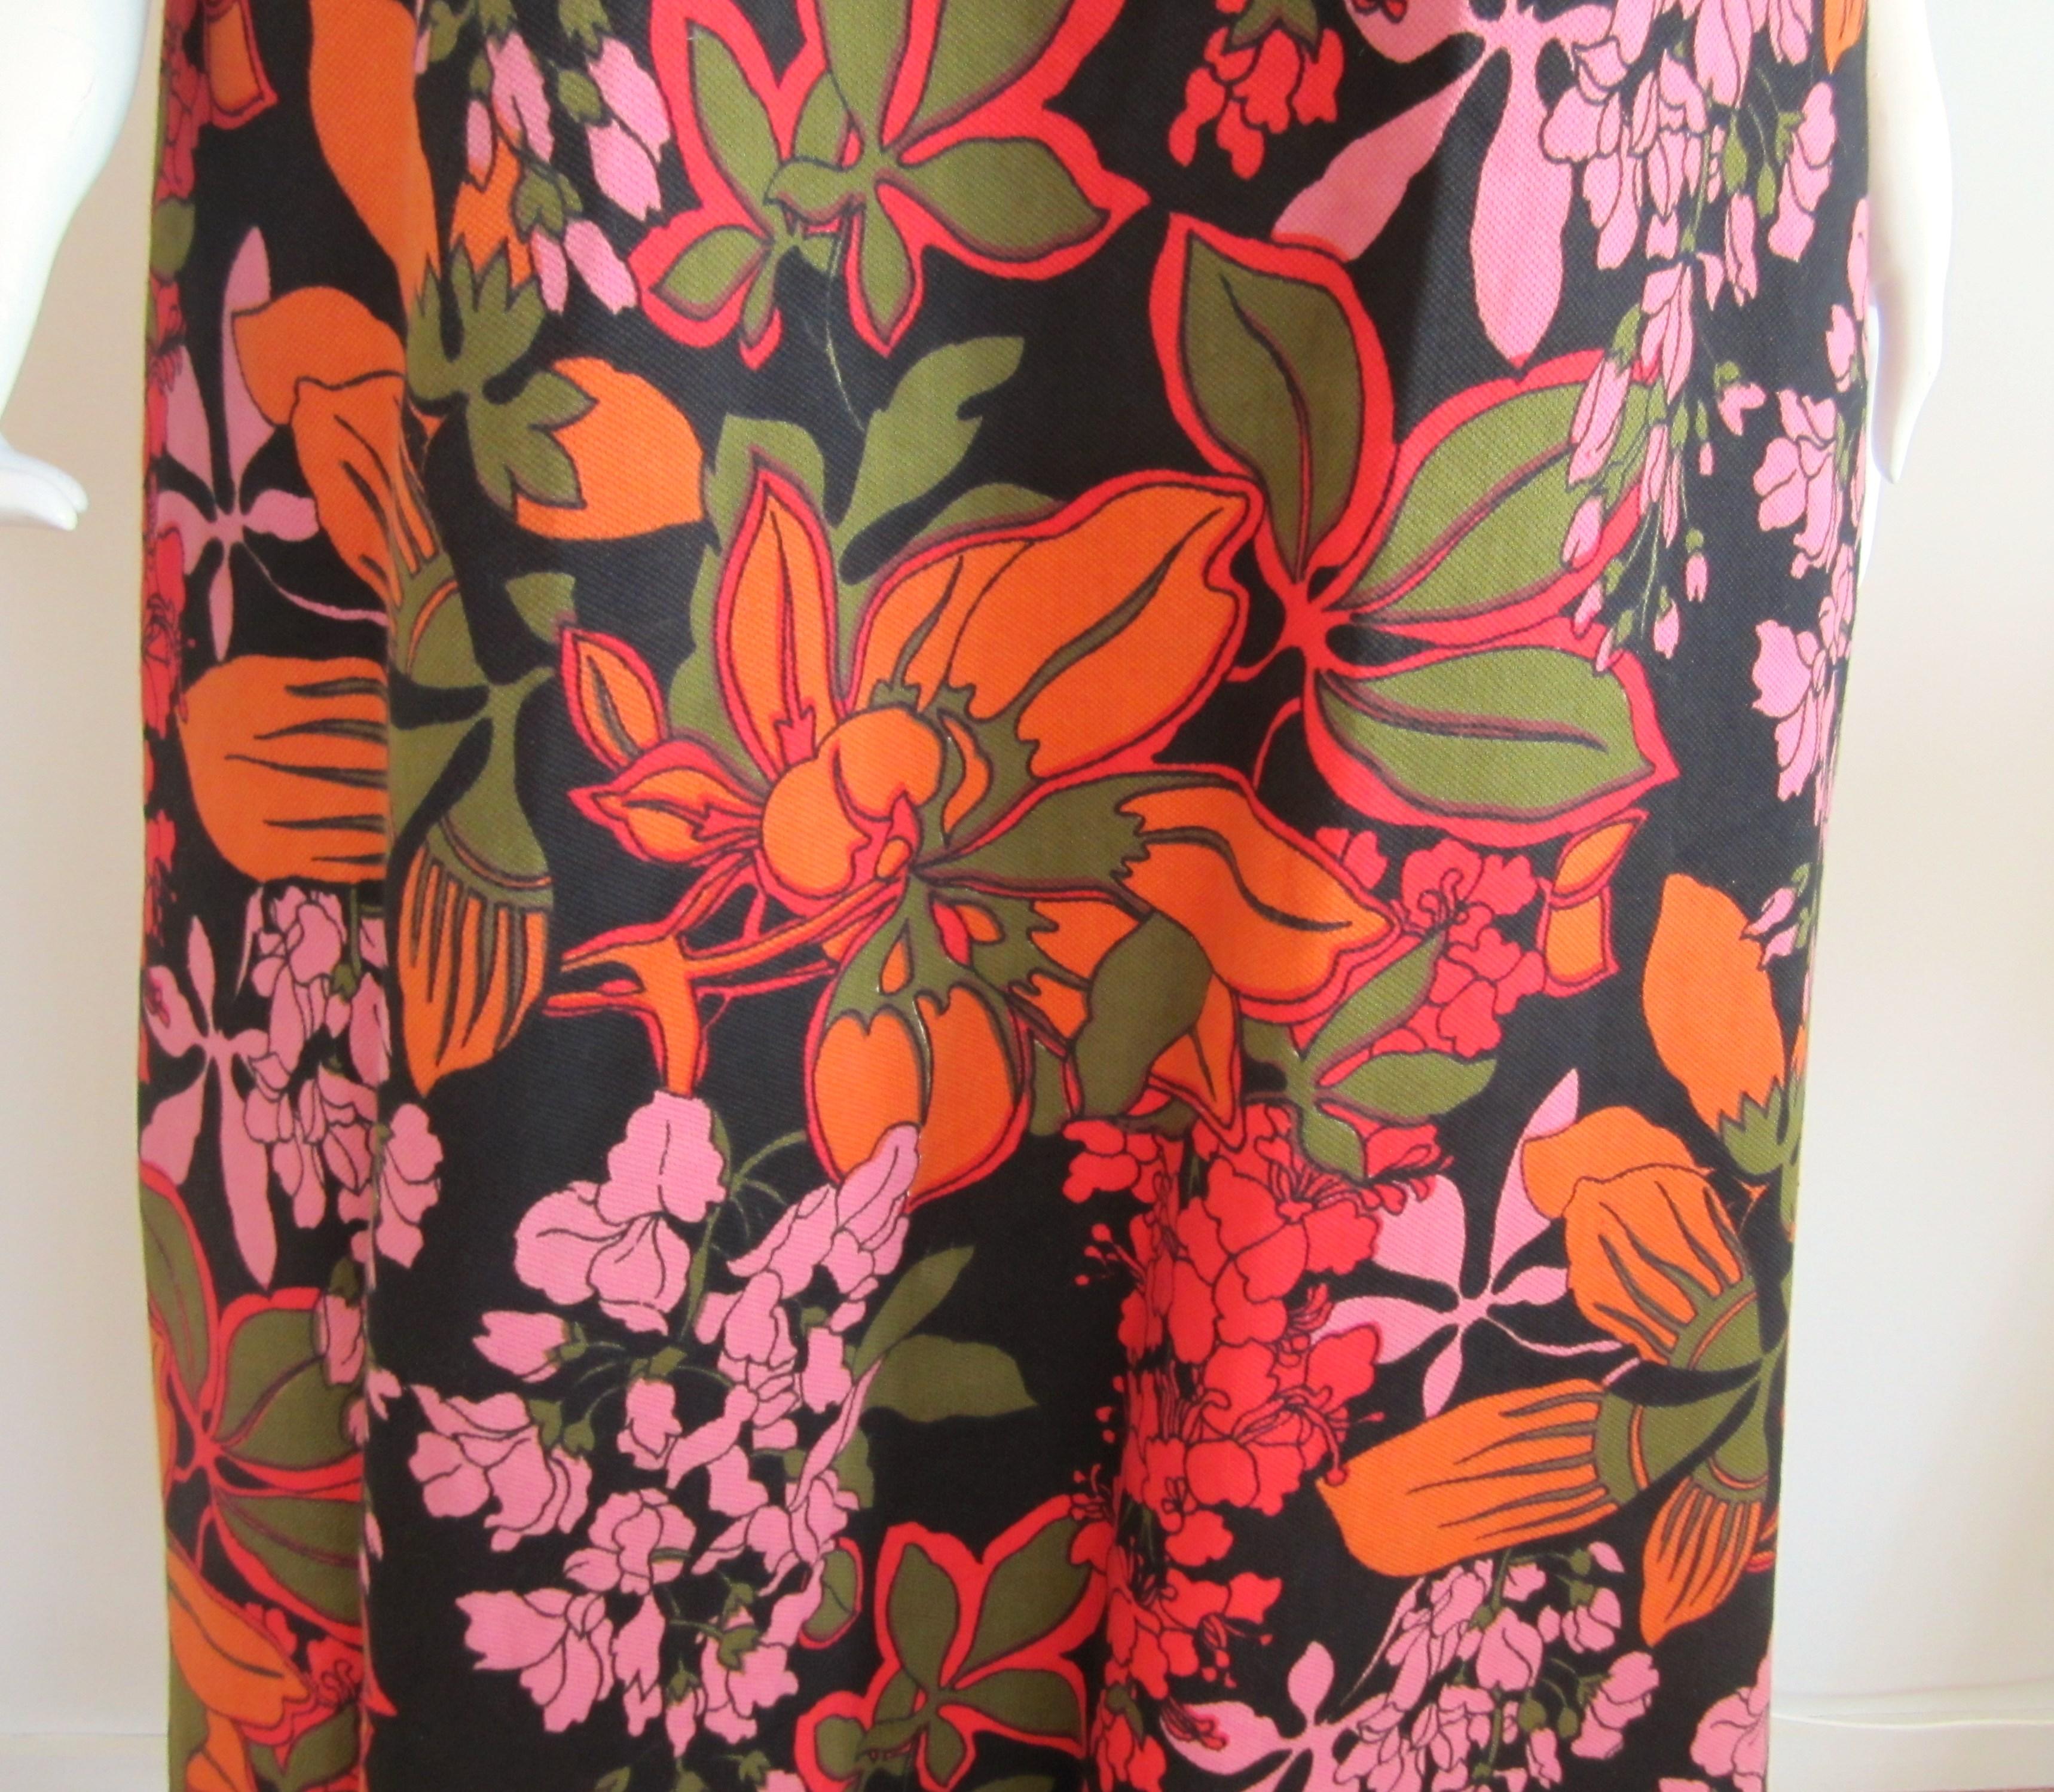 1970s Maxi Dress Bergdorf Goodman Floral Orange & Red  In Excellent Condition For Sale In Wallkill, NY